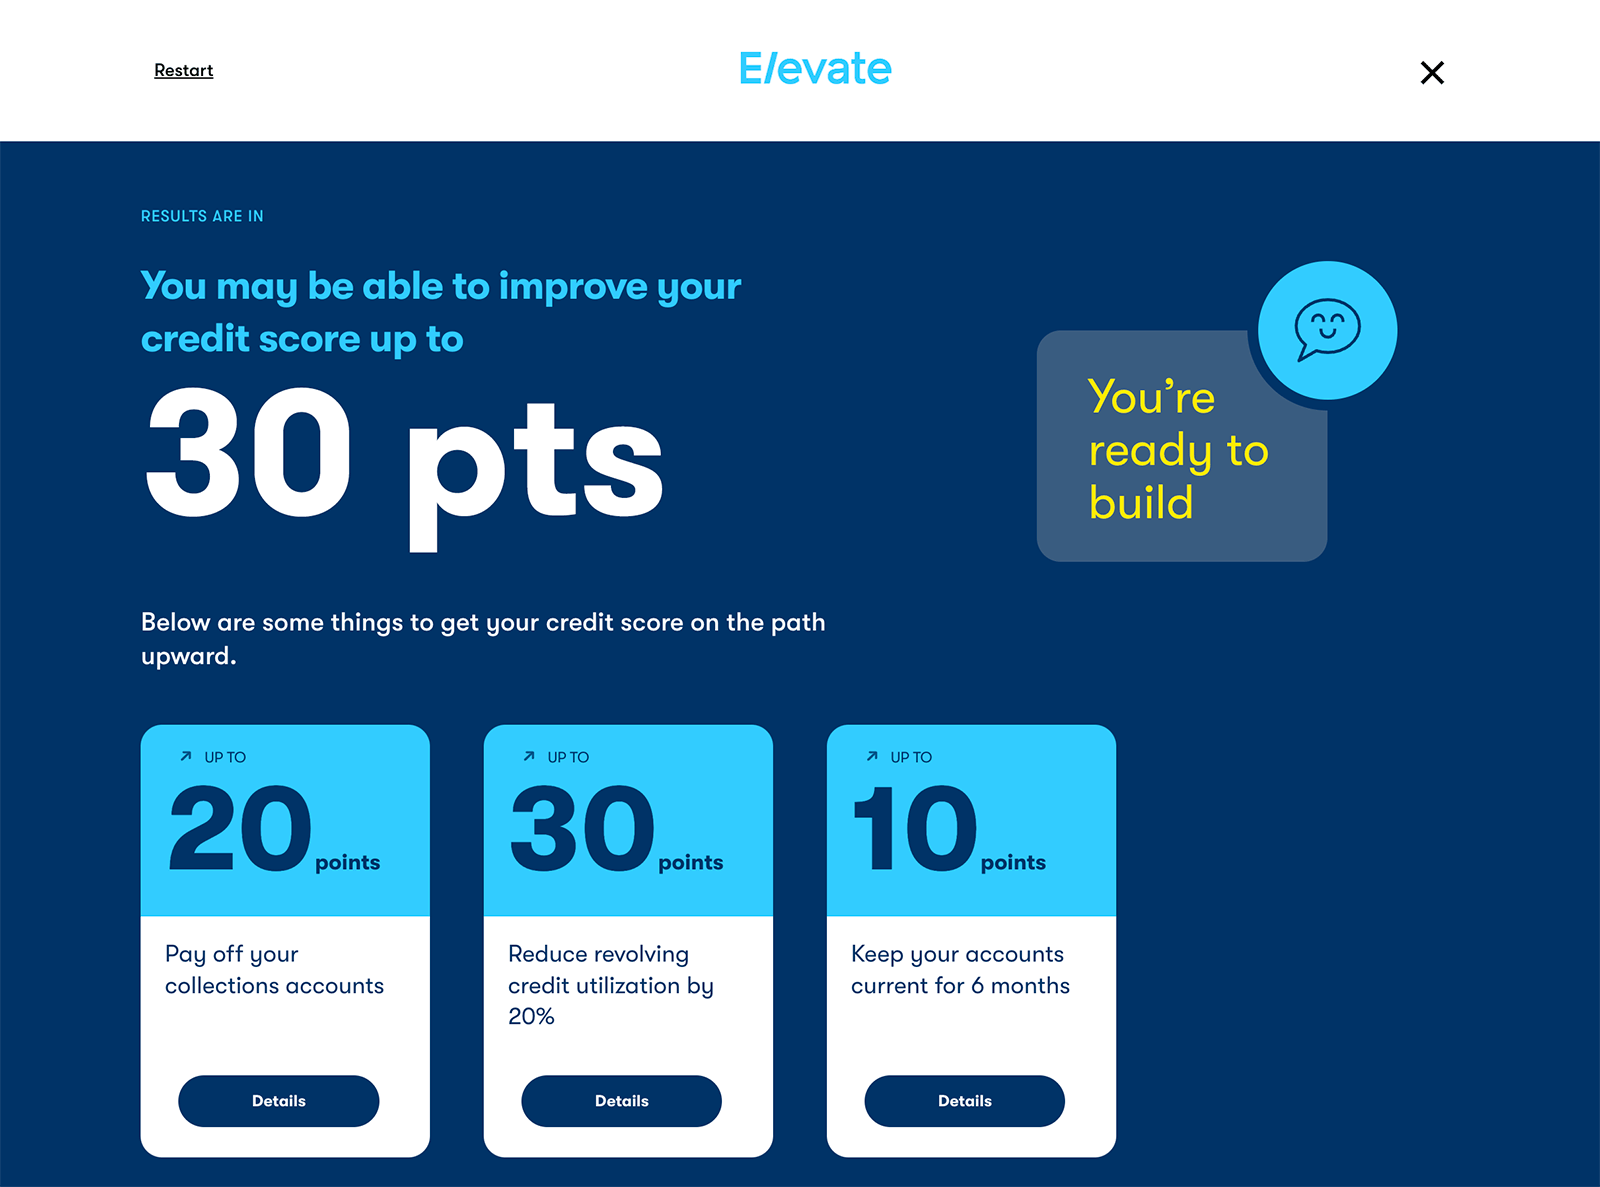 Example of results from Score40 quiz